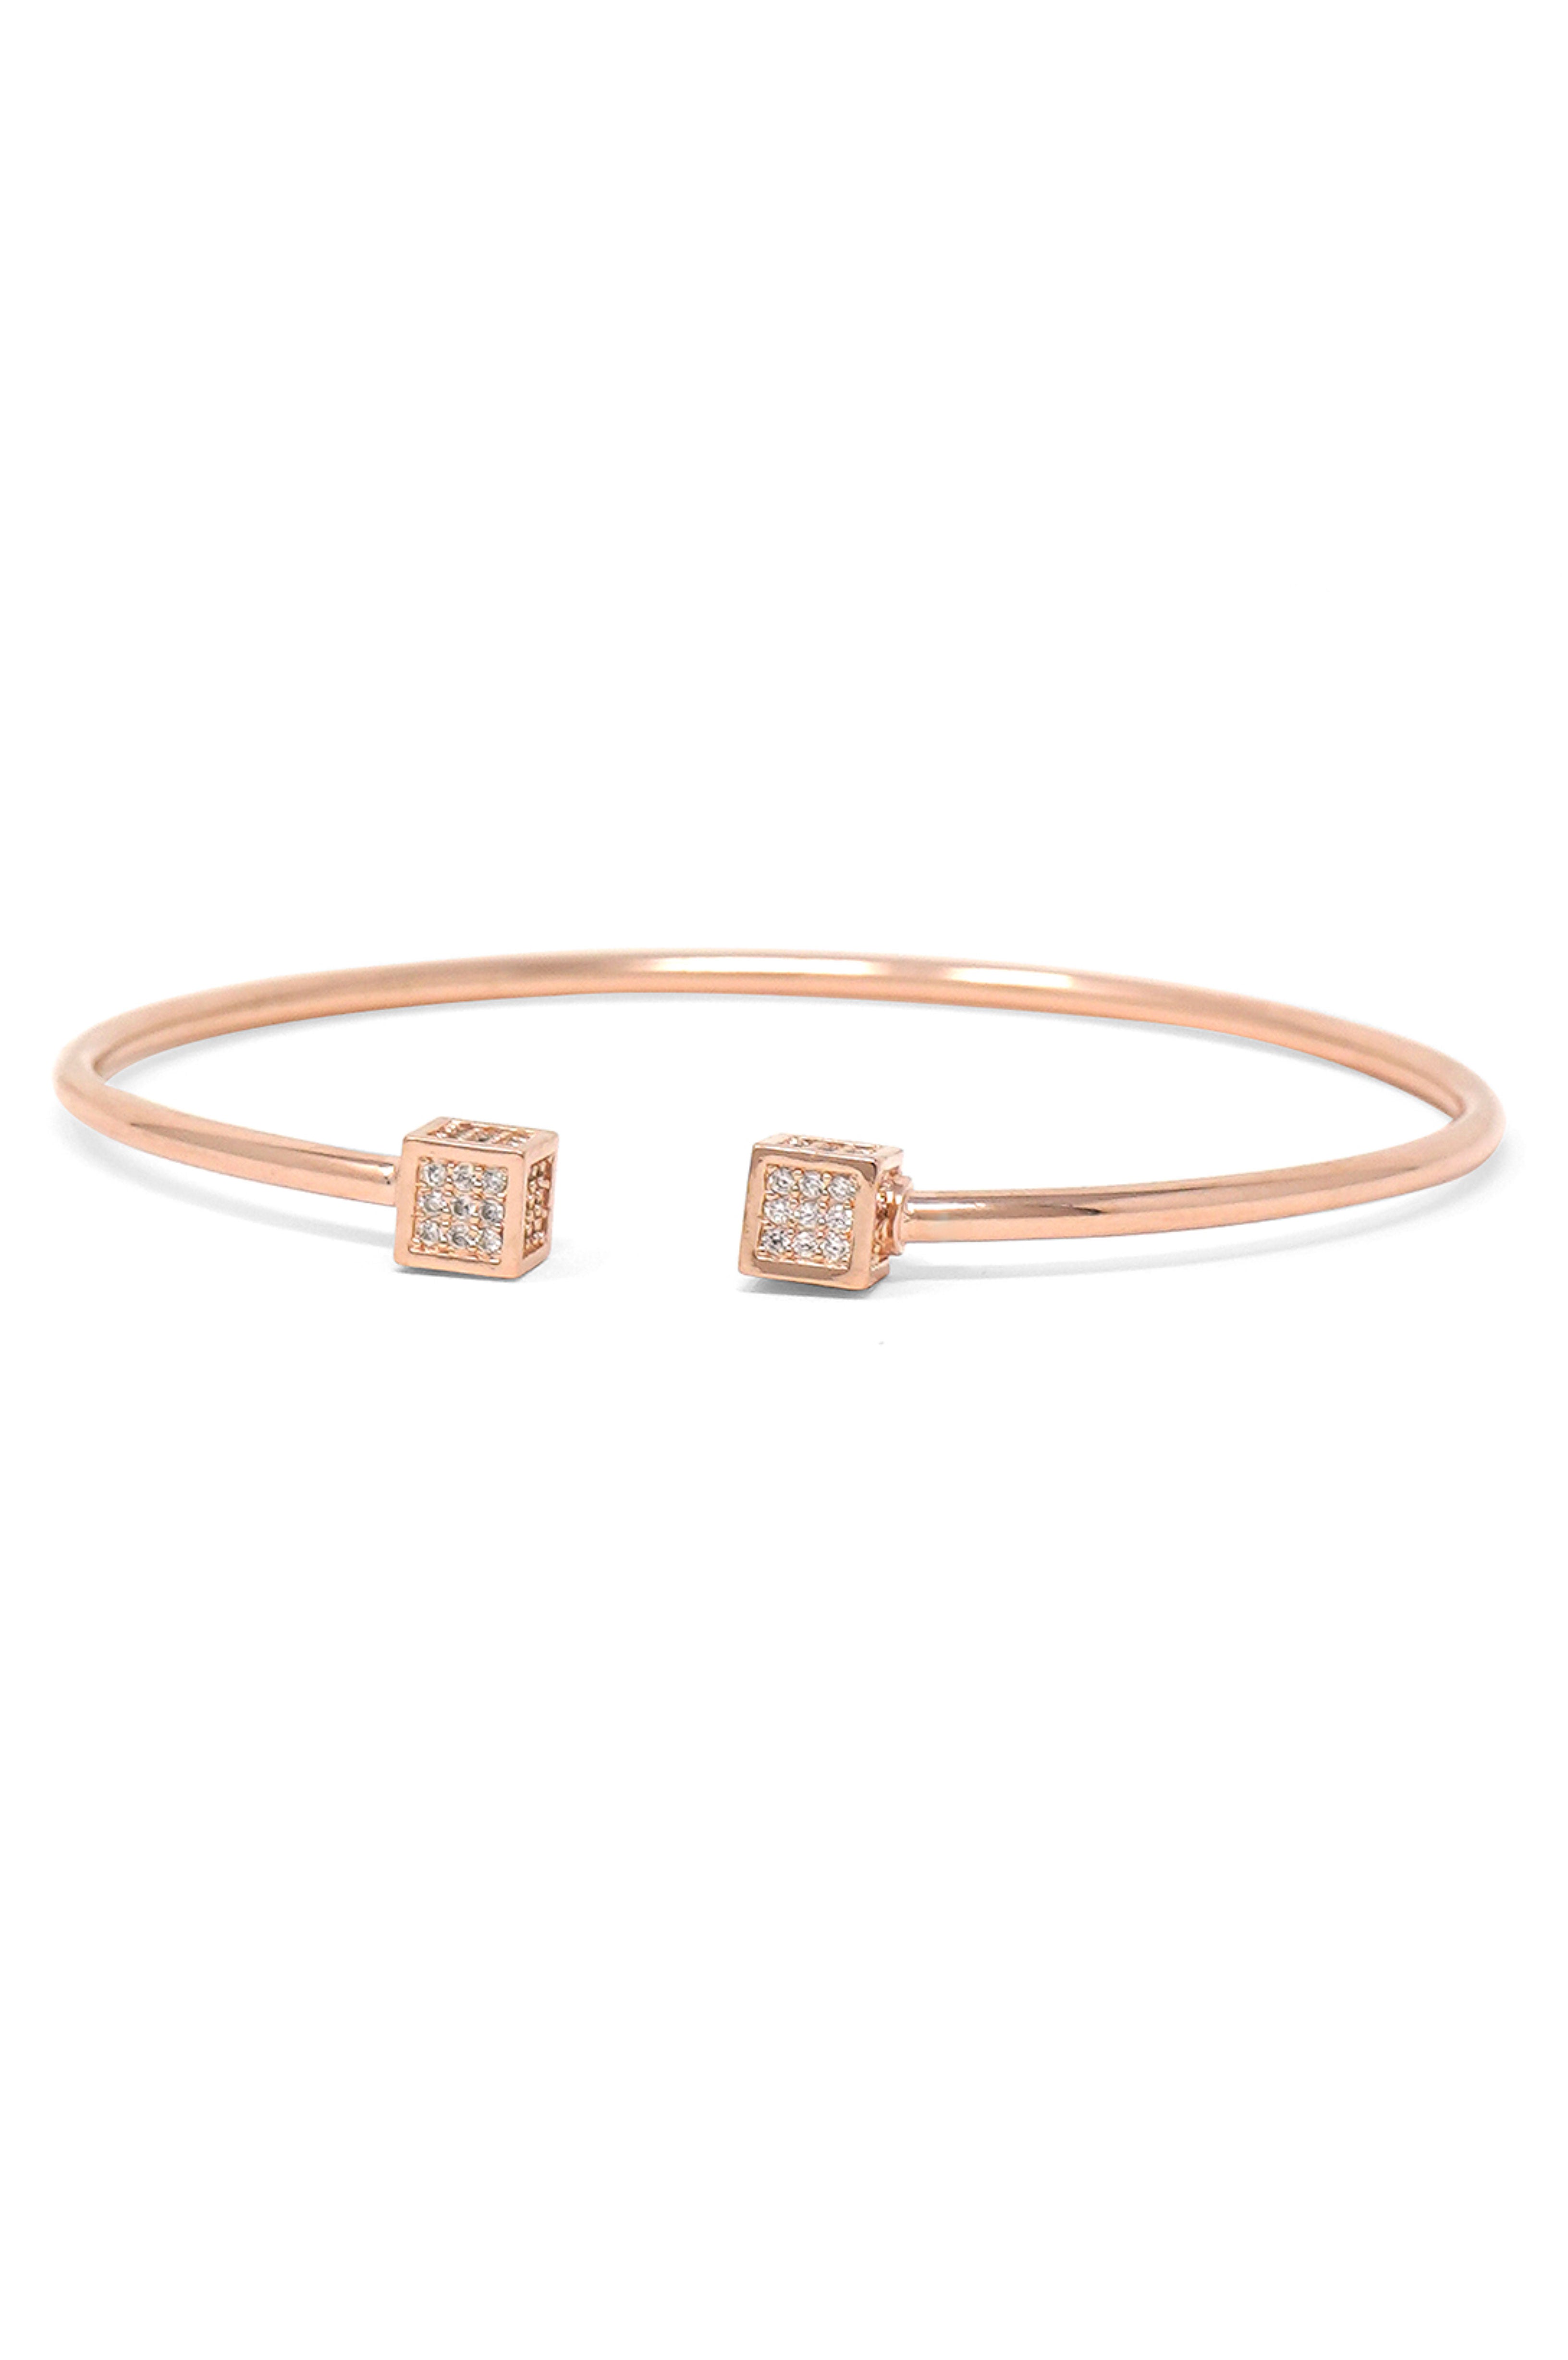 Buy Shining Diva Fashion 18k Rose Gold and Silver Plated Adjustable Crystal Cuff  Bracelet for Women and Girls (Rose Gold) at Amazon.in